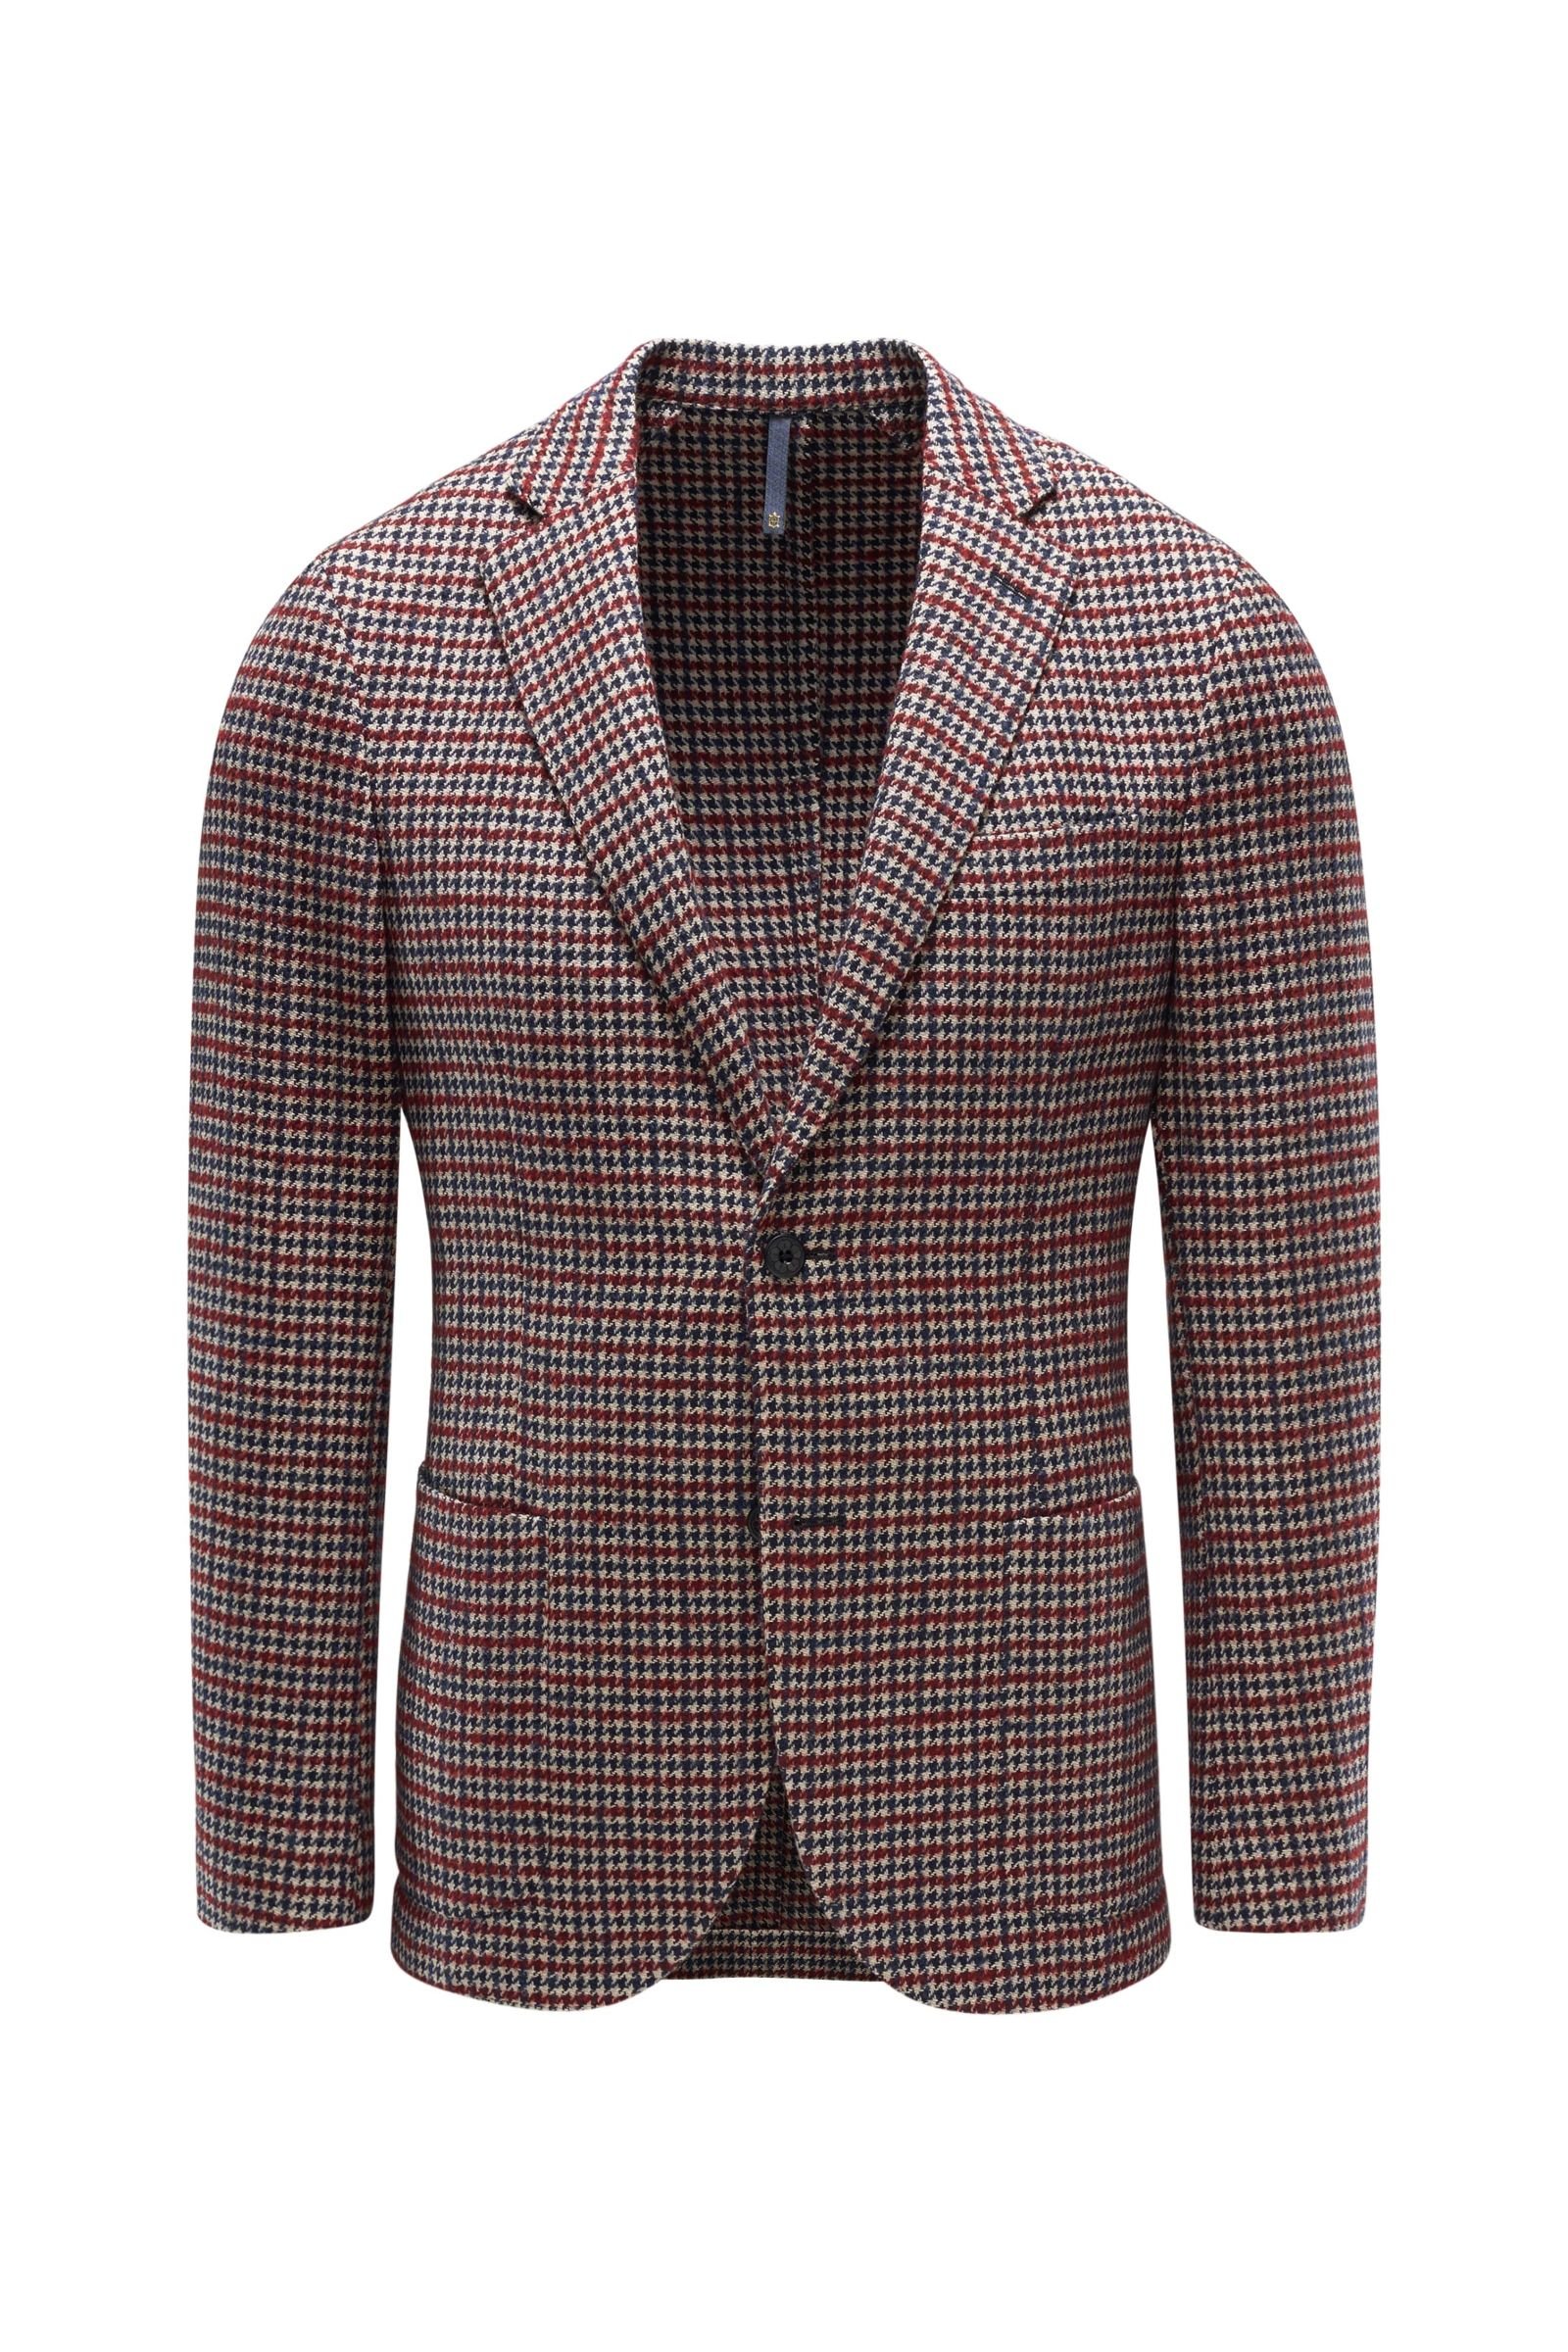 Smart-casual jacket burgundy/navy checked